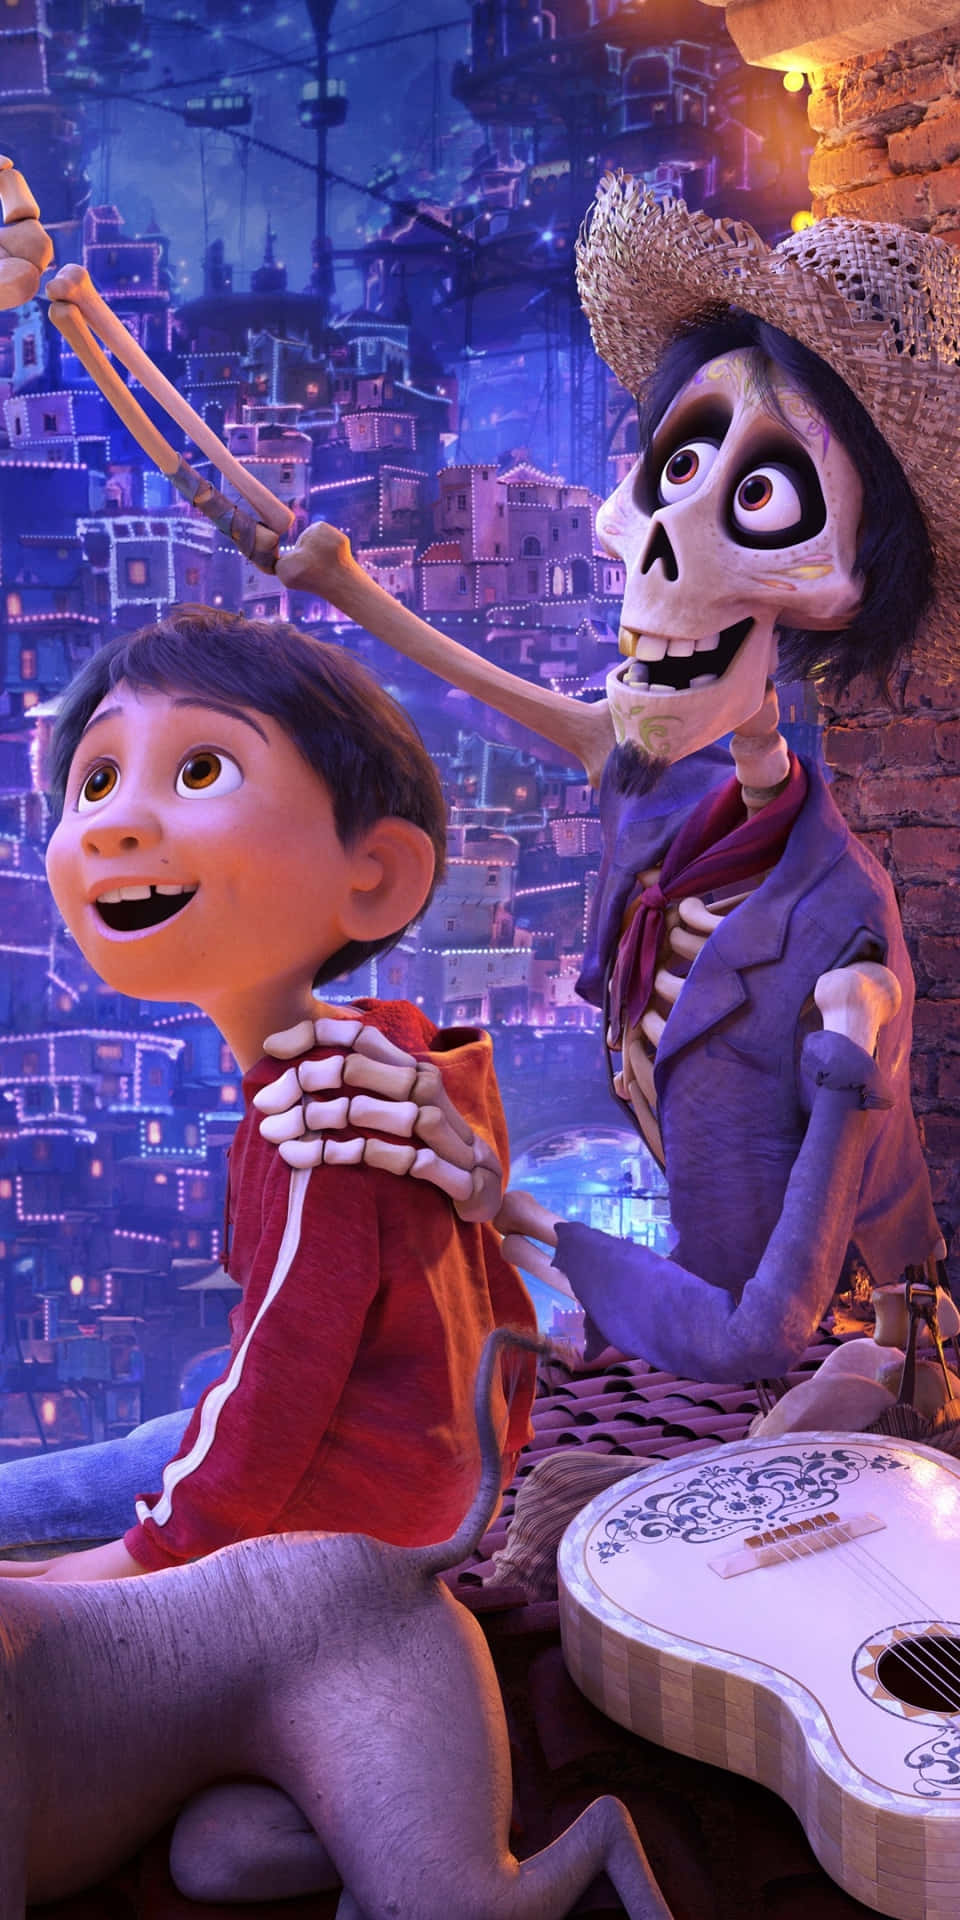 Memorable scenes from the award-winning animated movie, Coco.